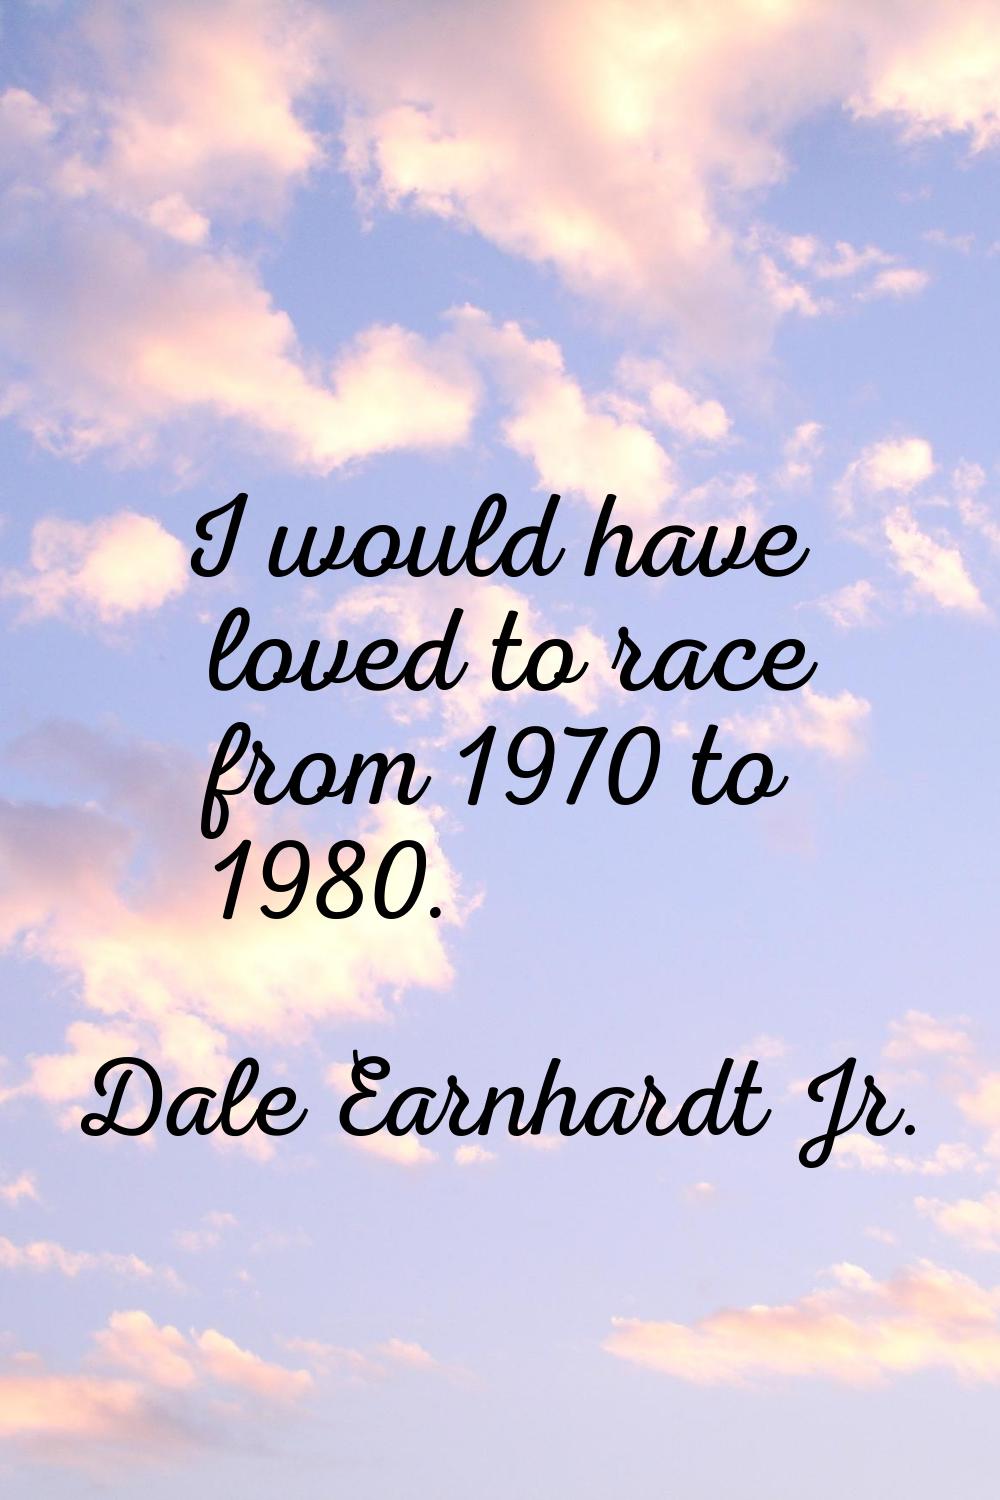 I would have loved to race from 1970 to 1980.